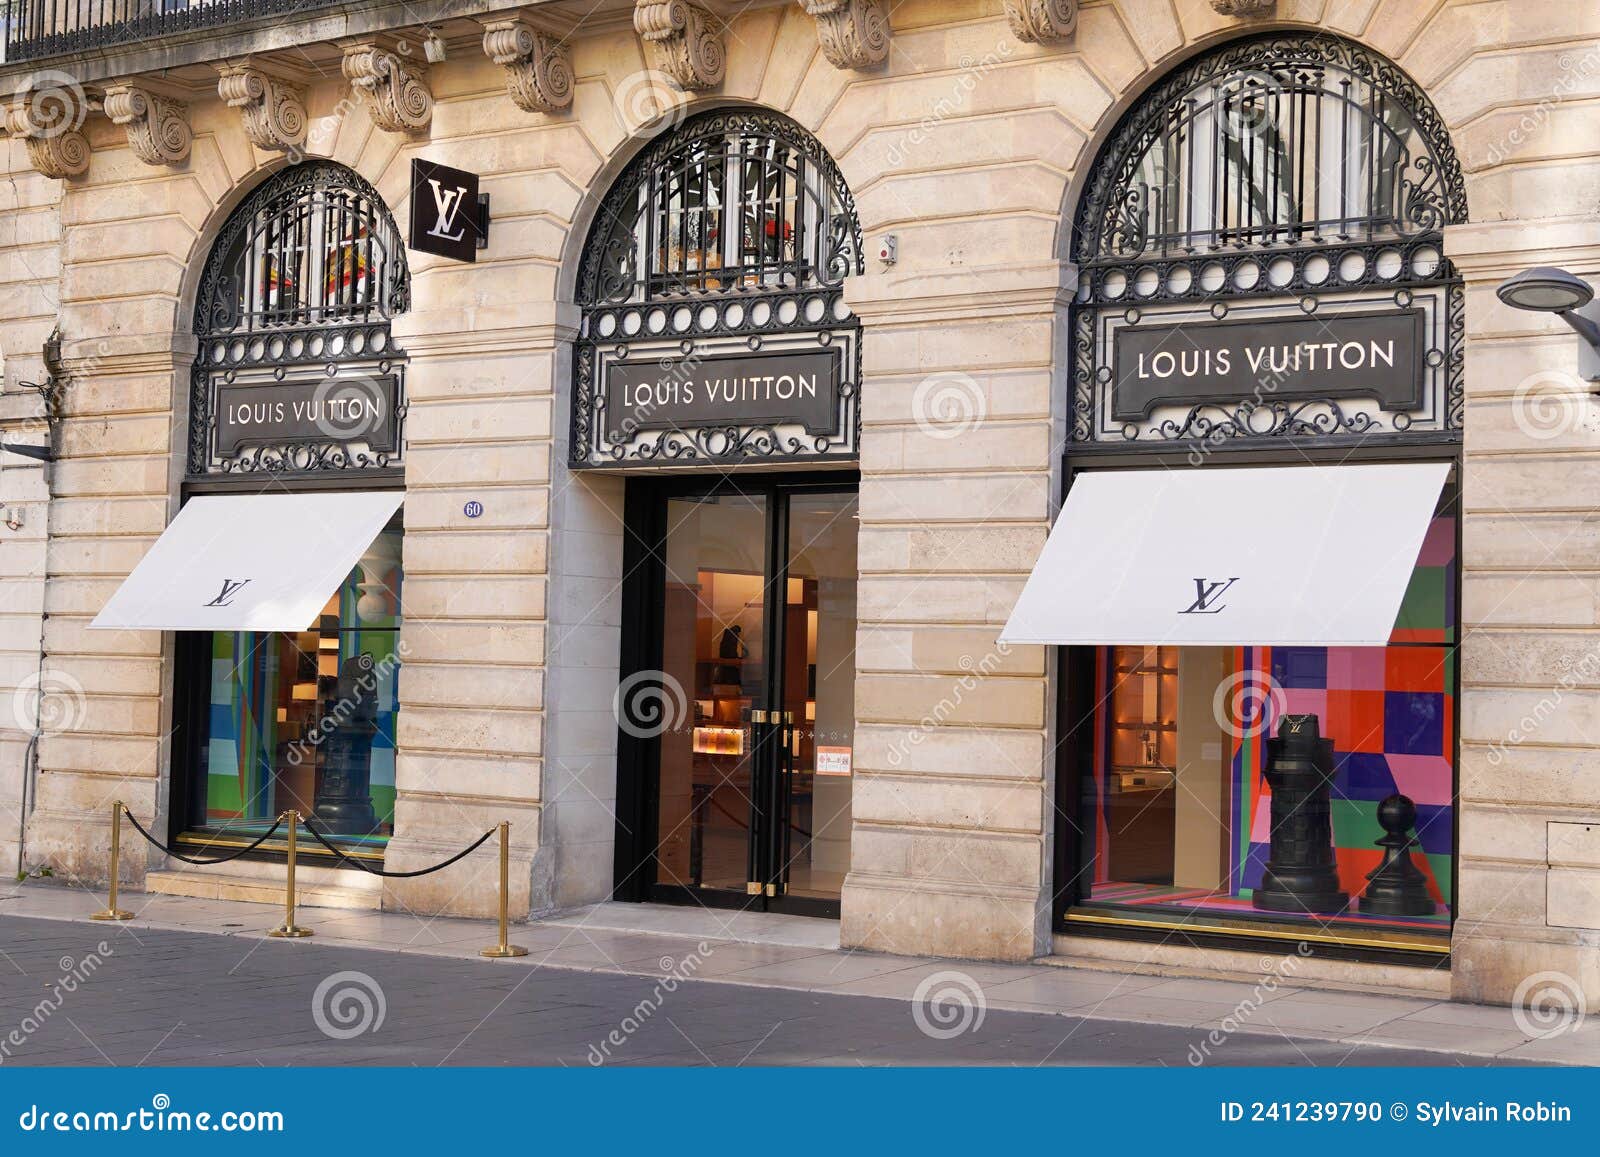 louis vuitton logo and sign text facade entrance store fashion brand  clothes shop in street view Stock Photo